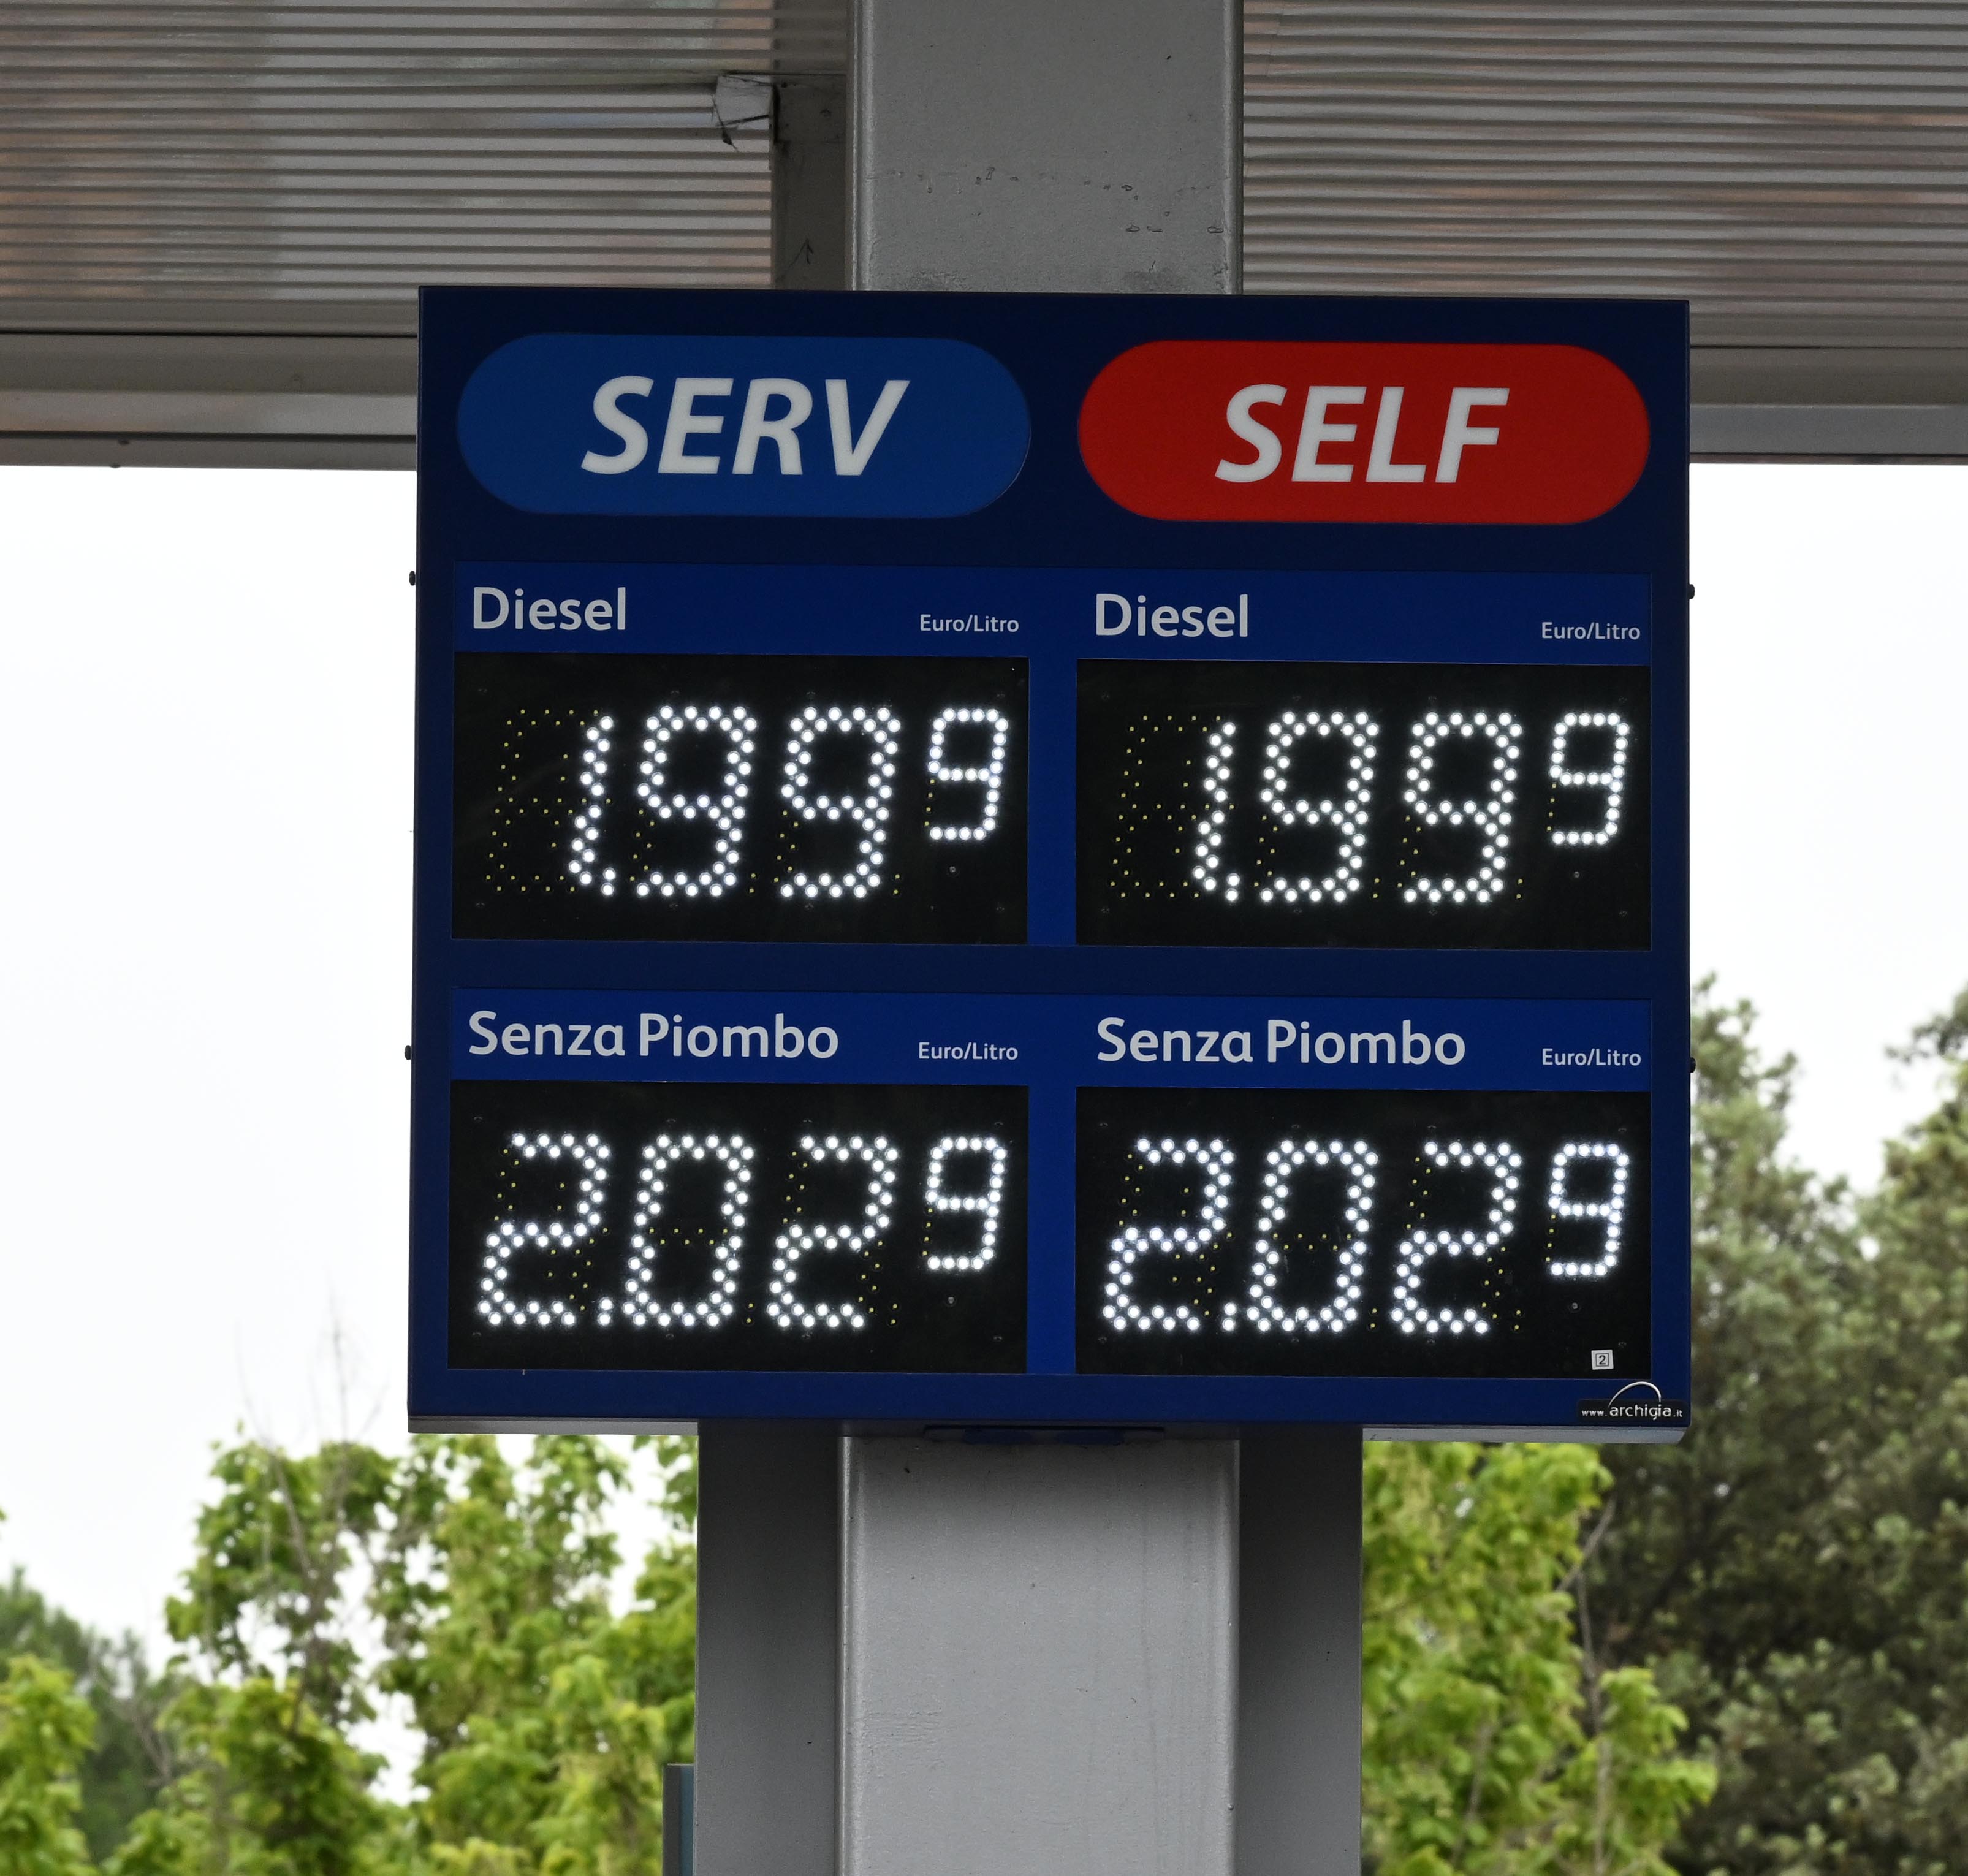 Gasoline and diesel prices are displayed near a gas station in Rome, Italy, June 23, 2022.